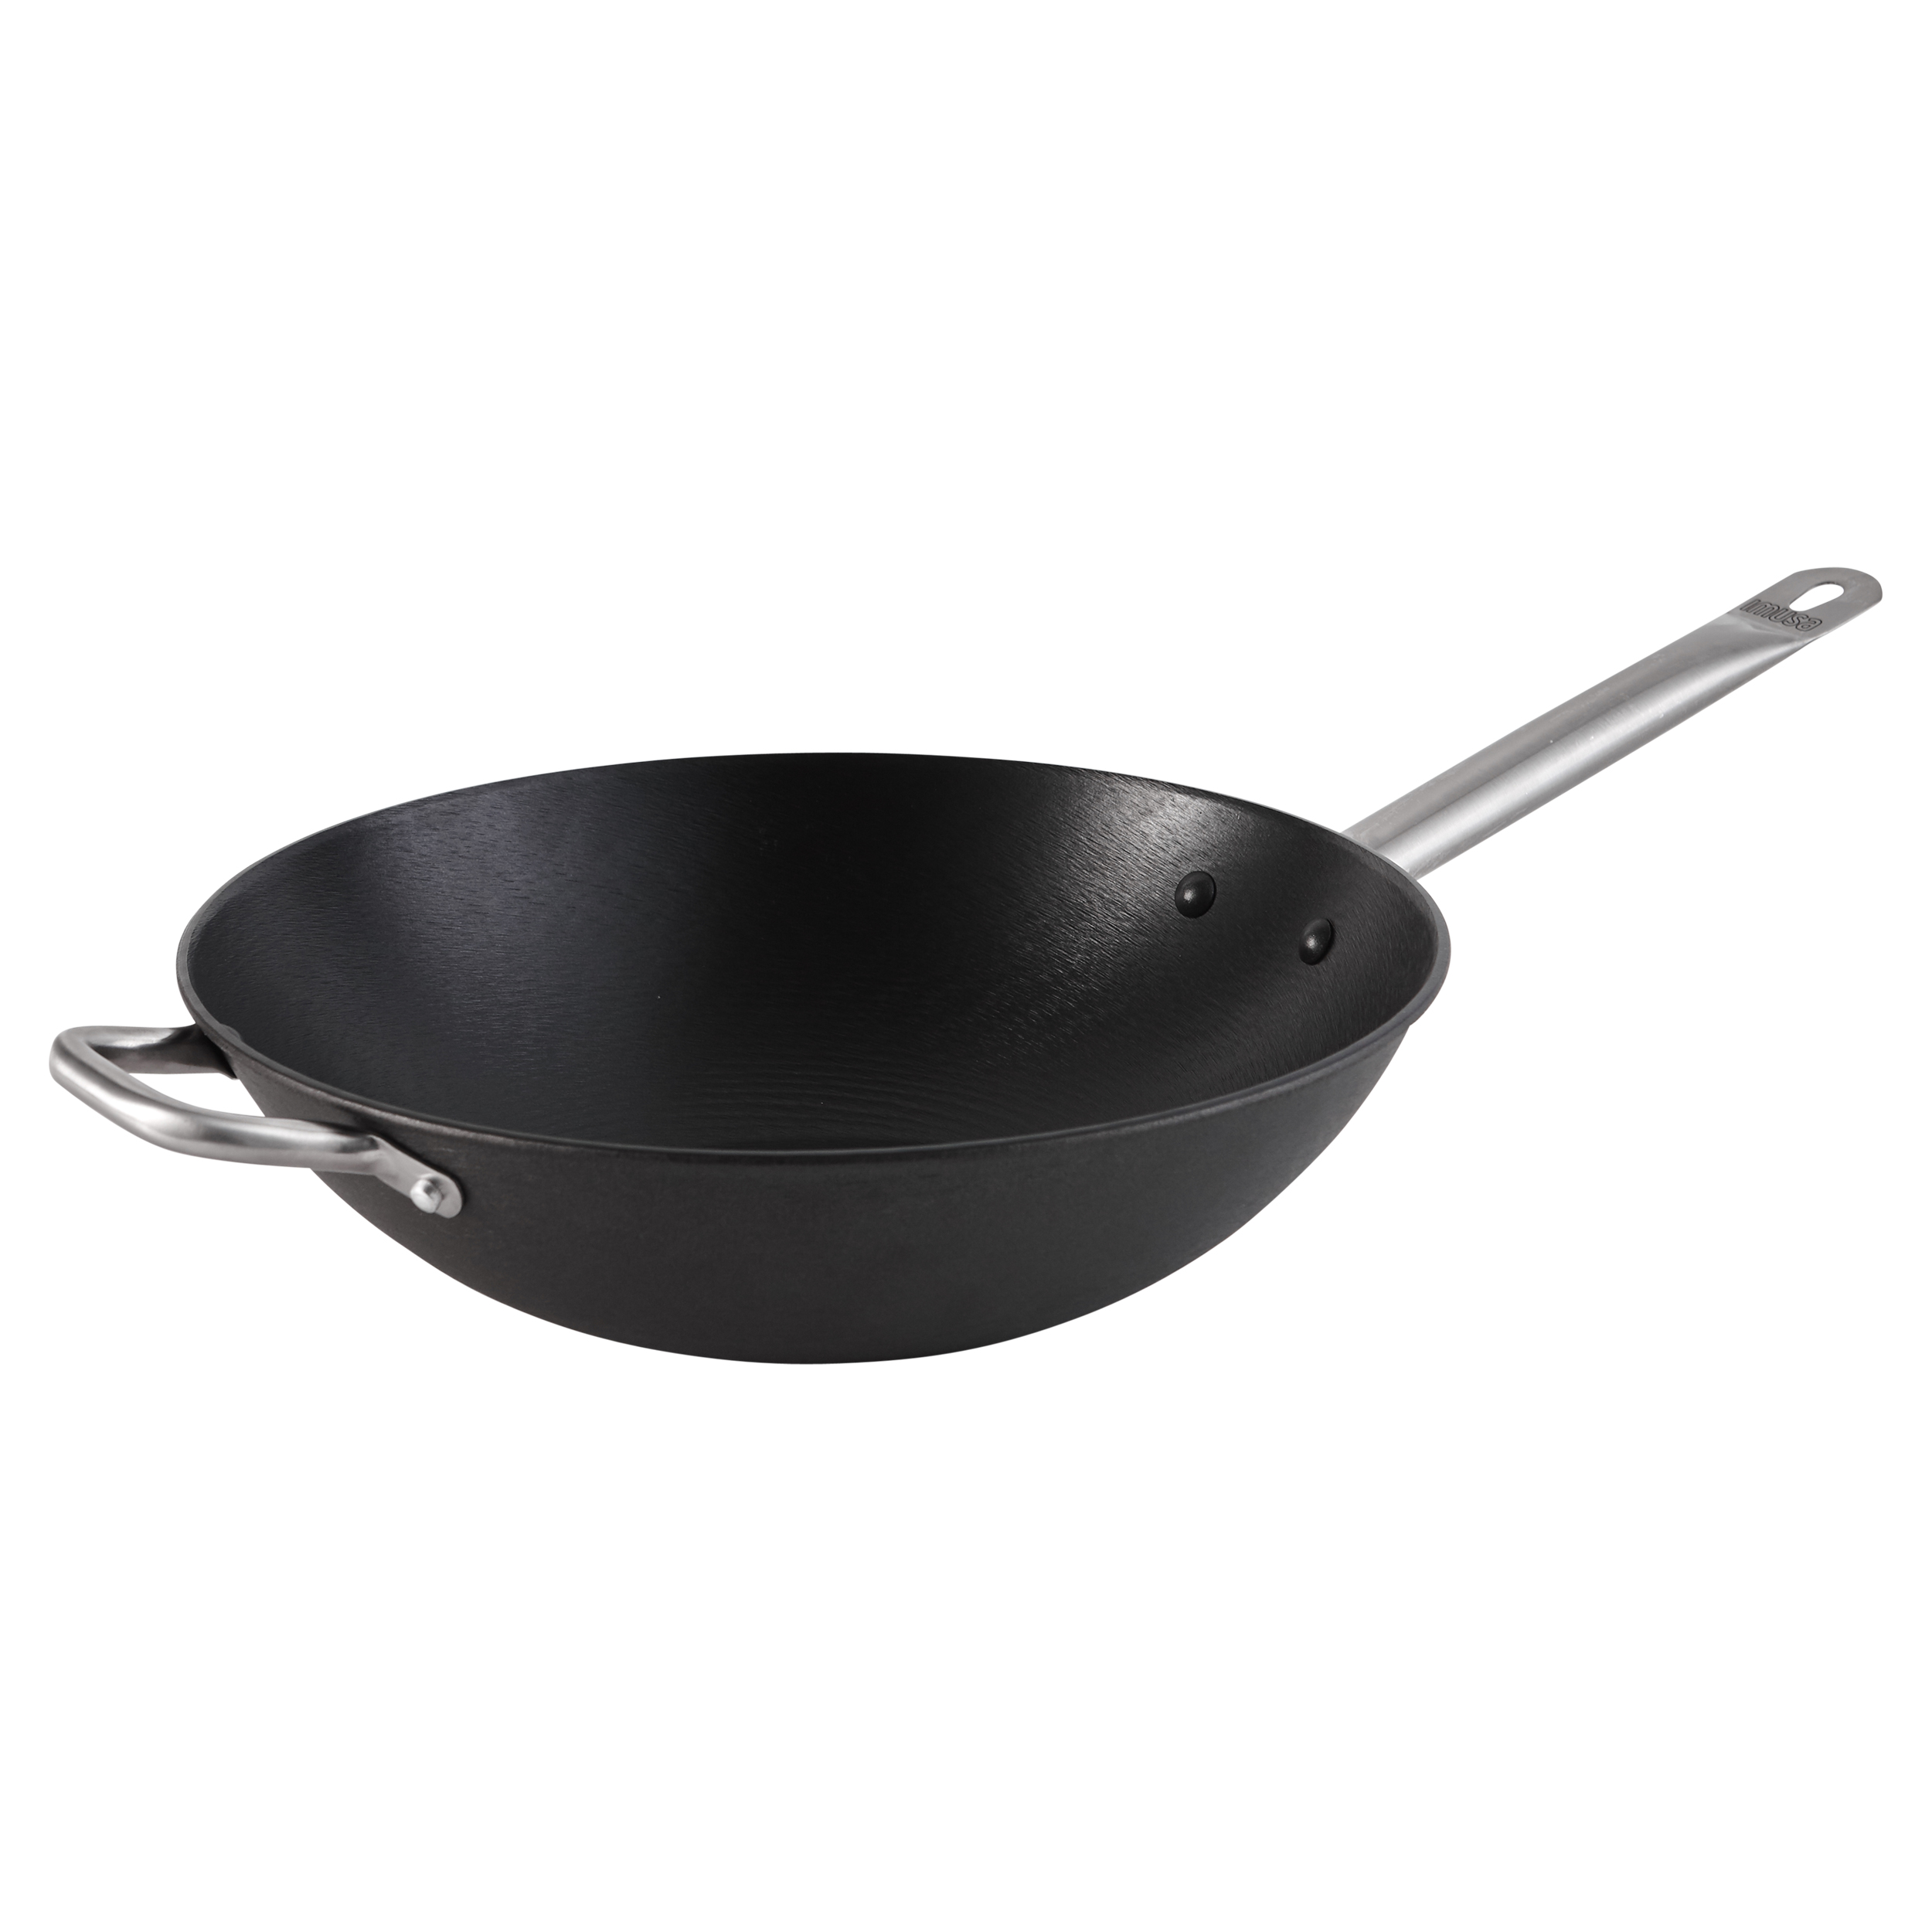 Imusa Usa 14"Carbon Steel Round Black Comal With Metal Handles 